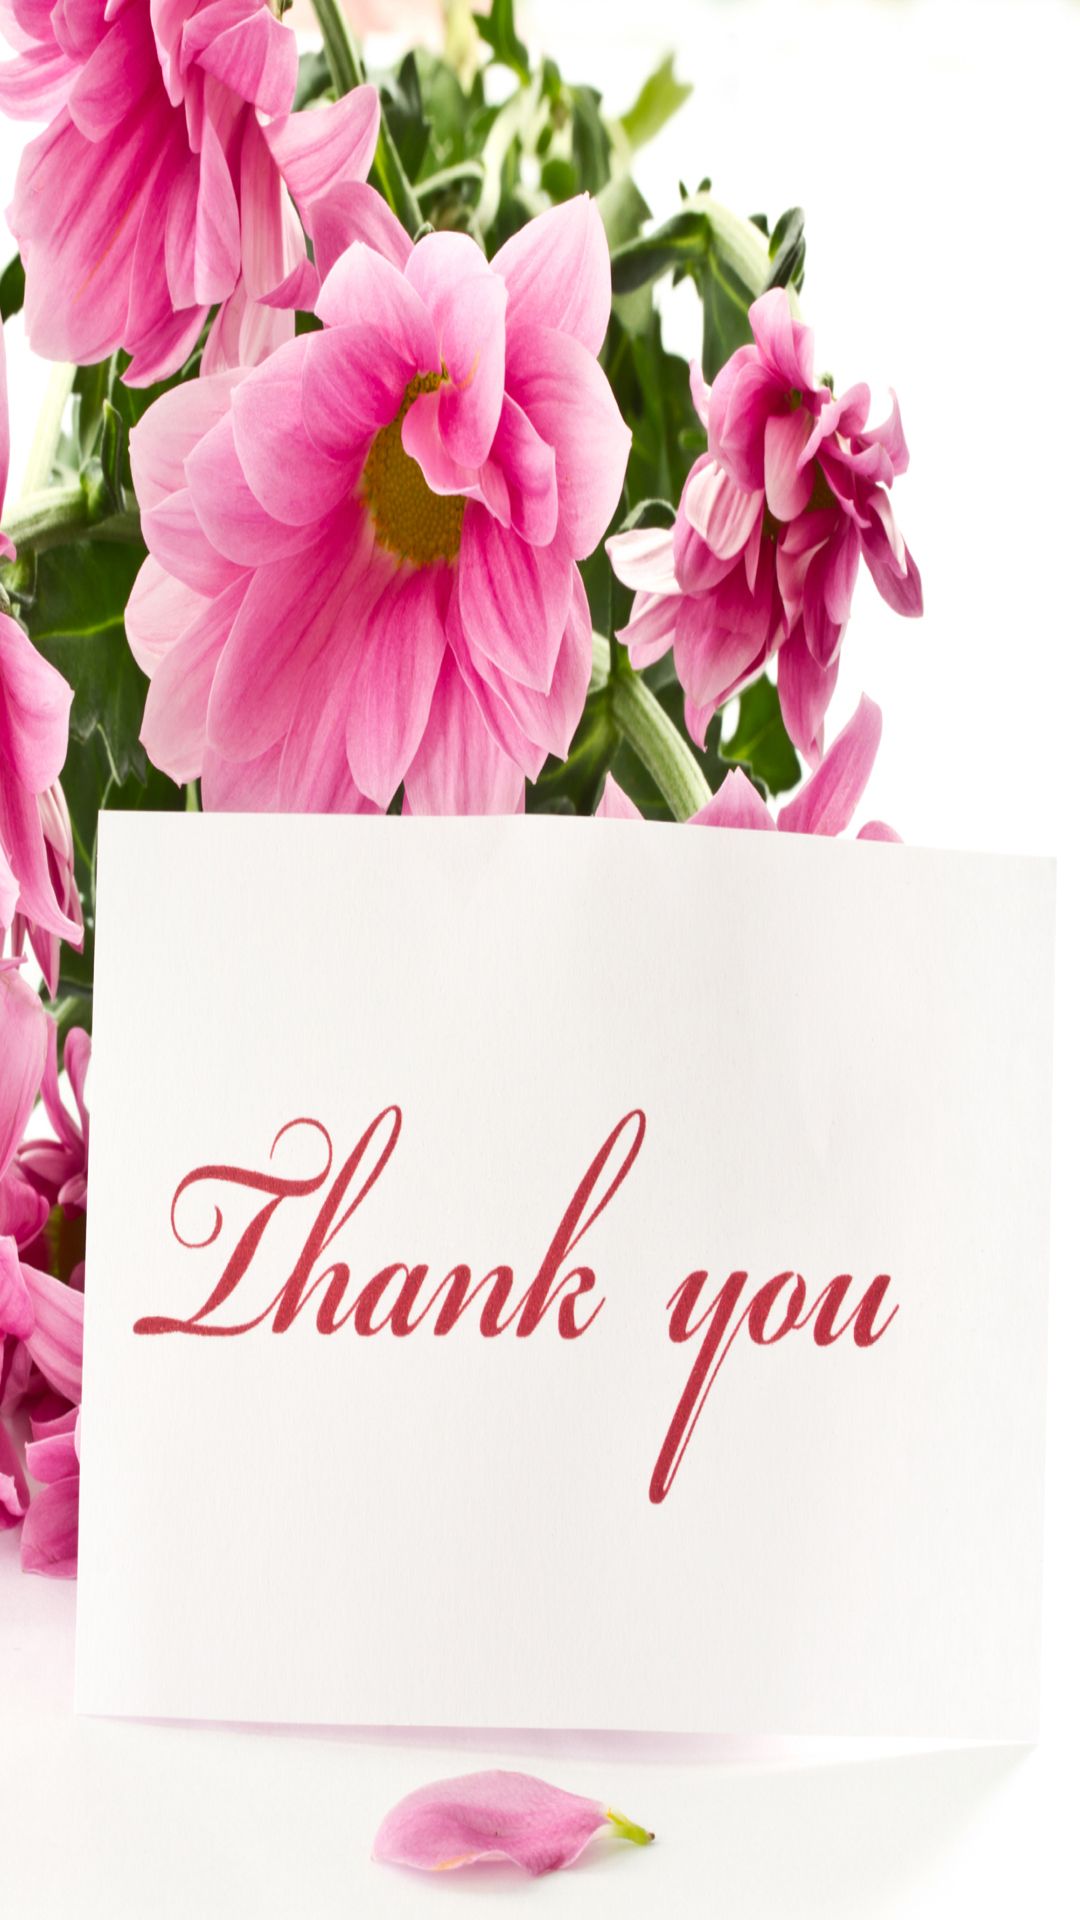 Thank you with pink flowers iphone 6 full hd latest wallpapers ...